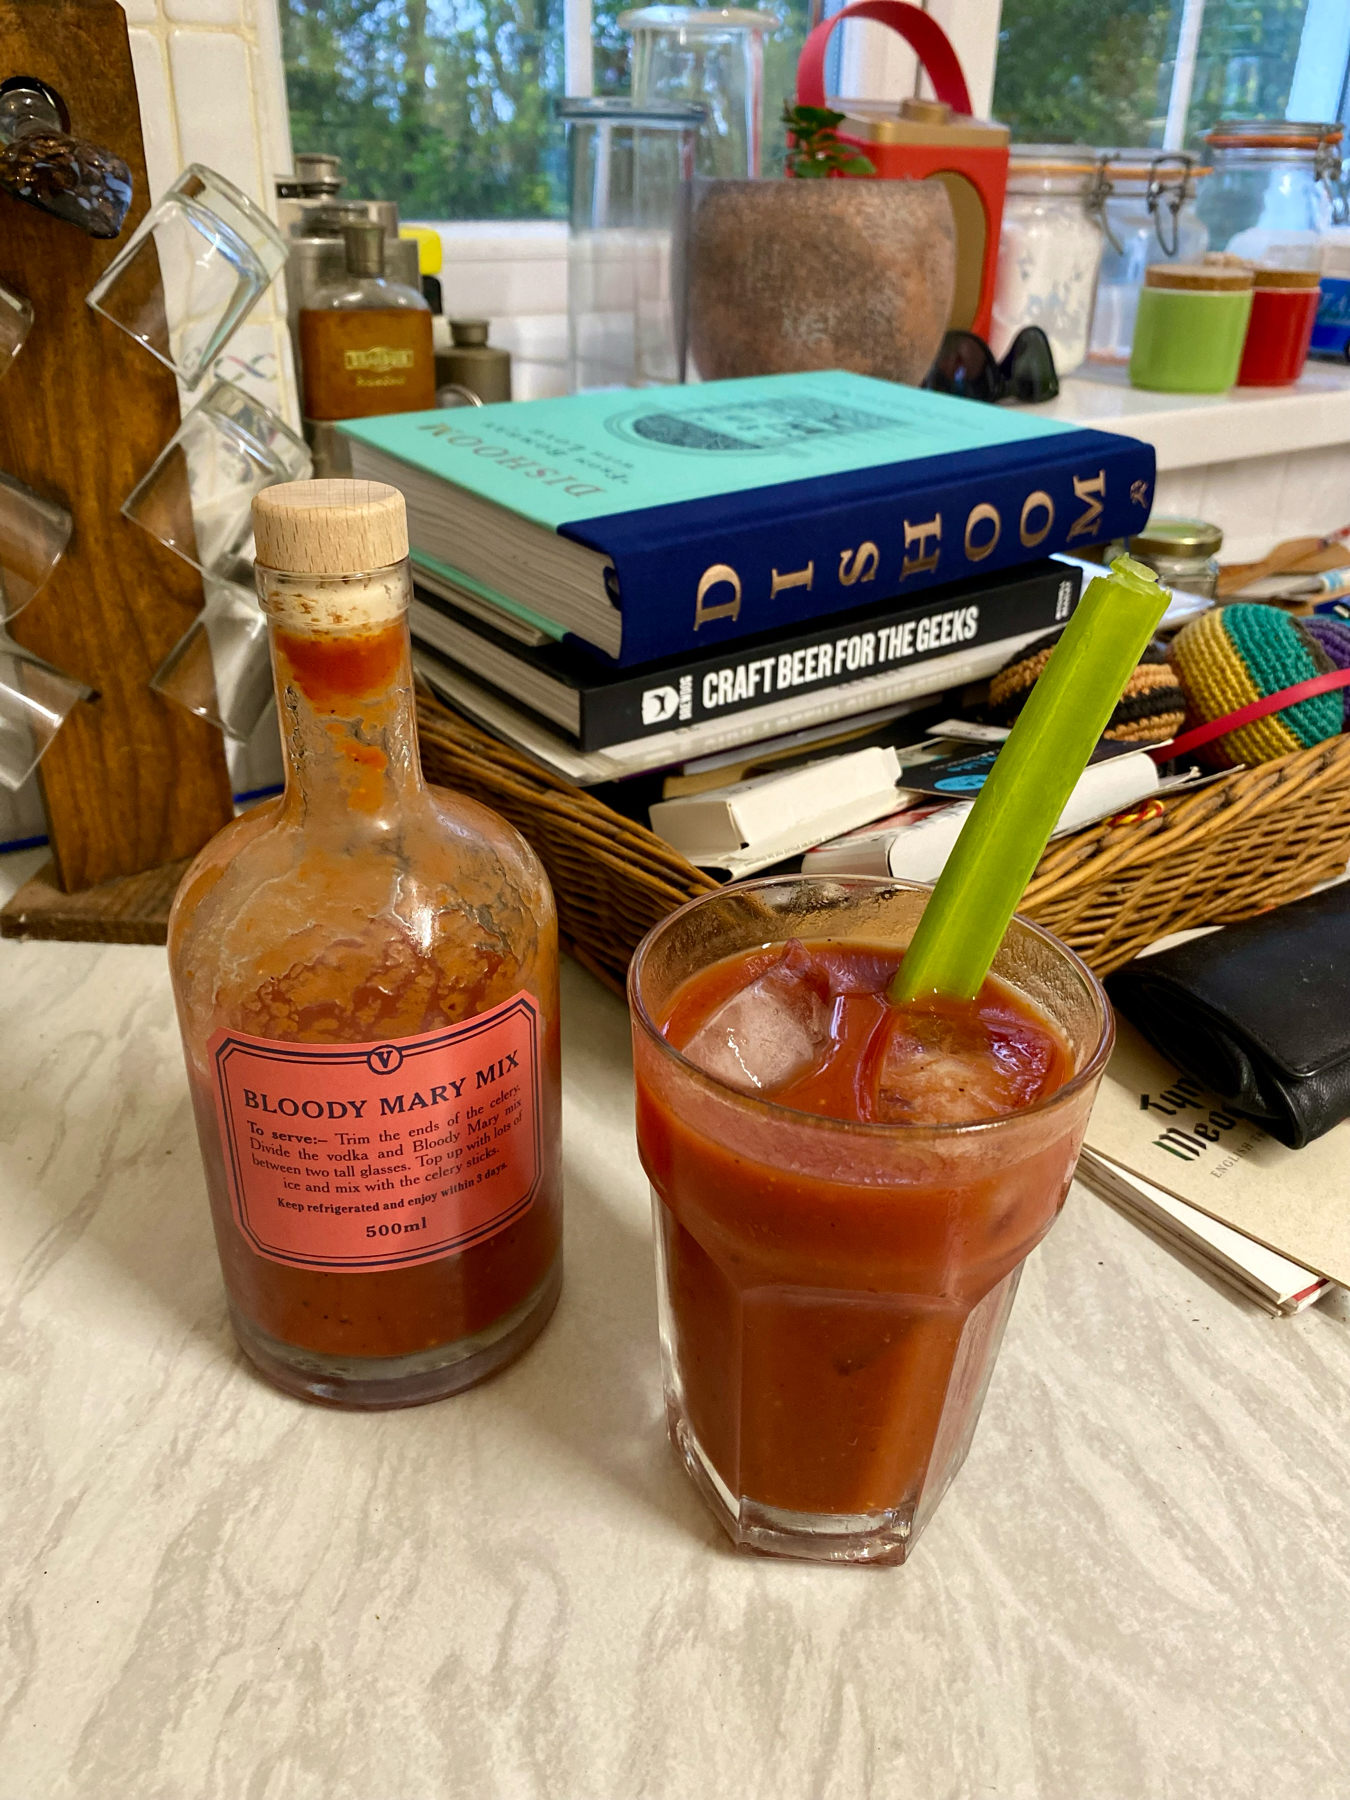 A Bloody Mary cocktail with a celery stick in a glass next to a bottle of Bloody Mary mix on a kitchen counter, with books and kitchen items in the background.